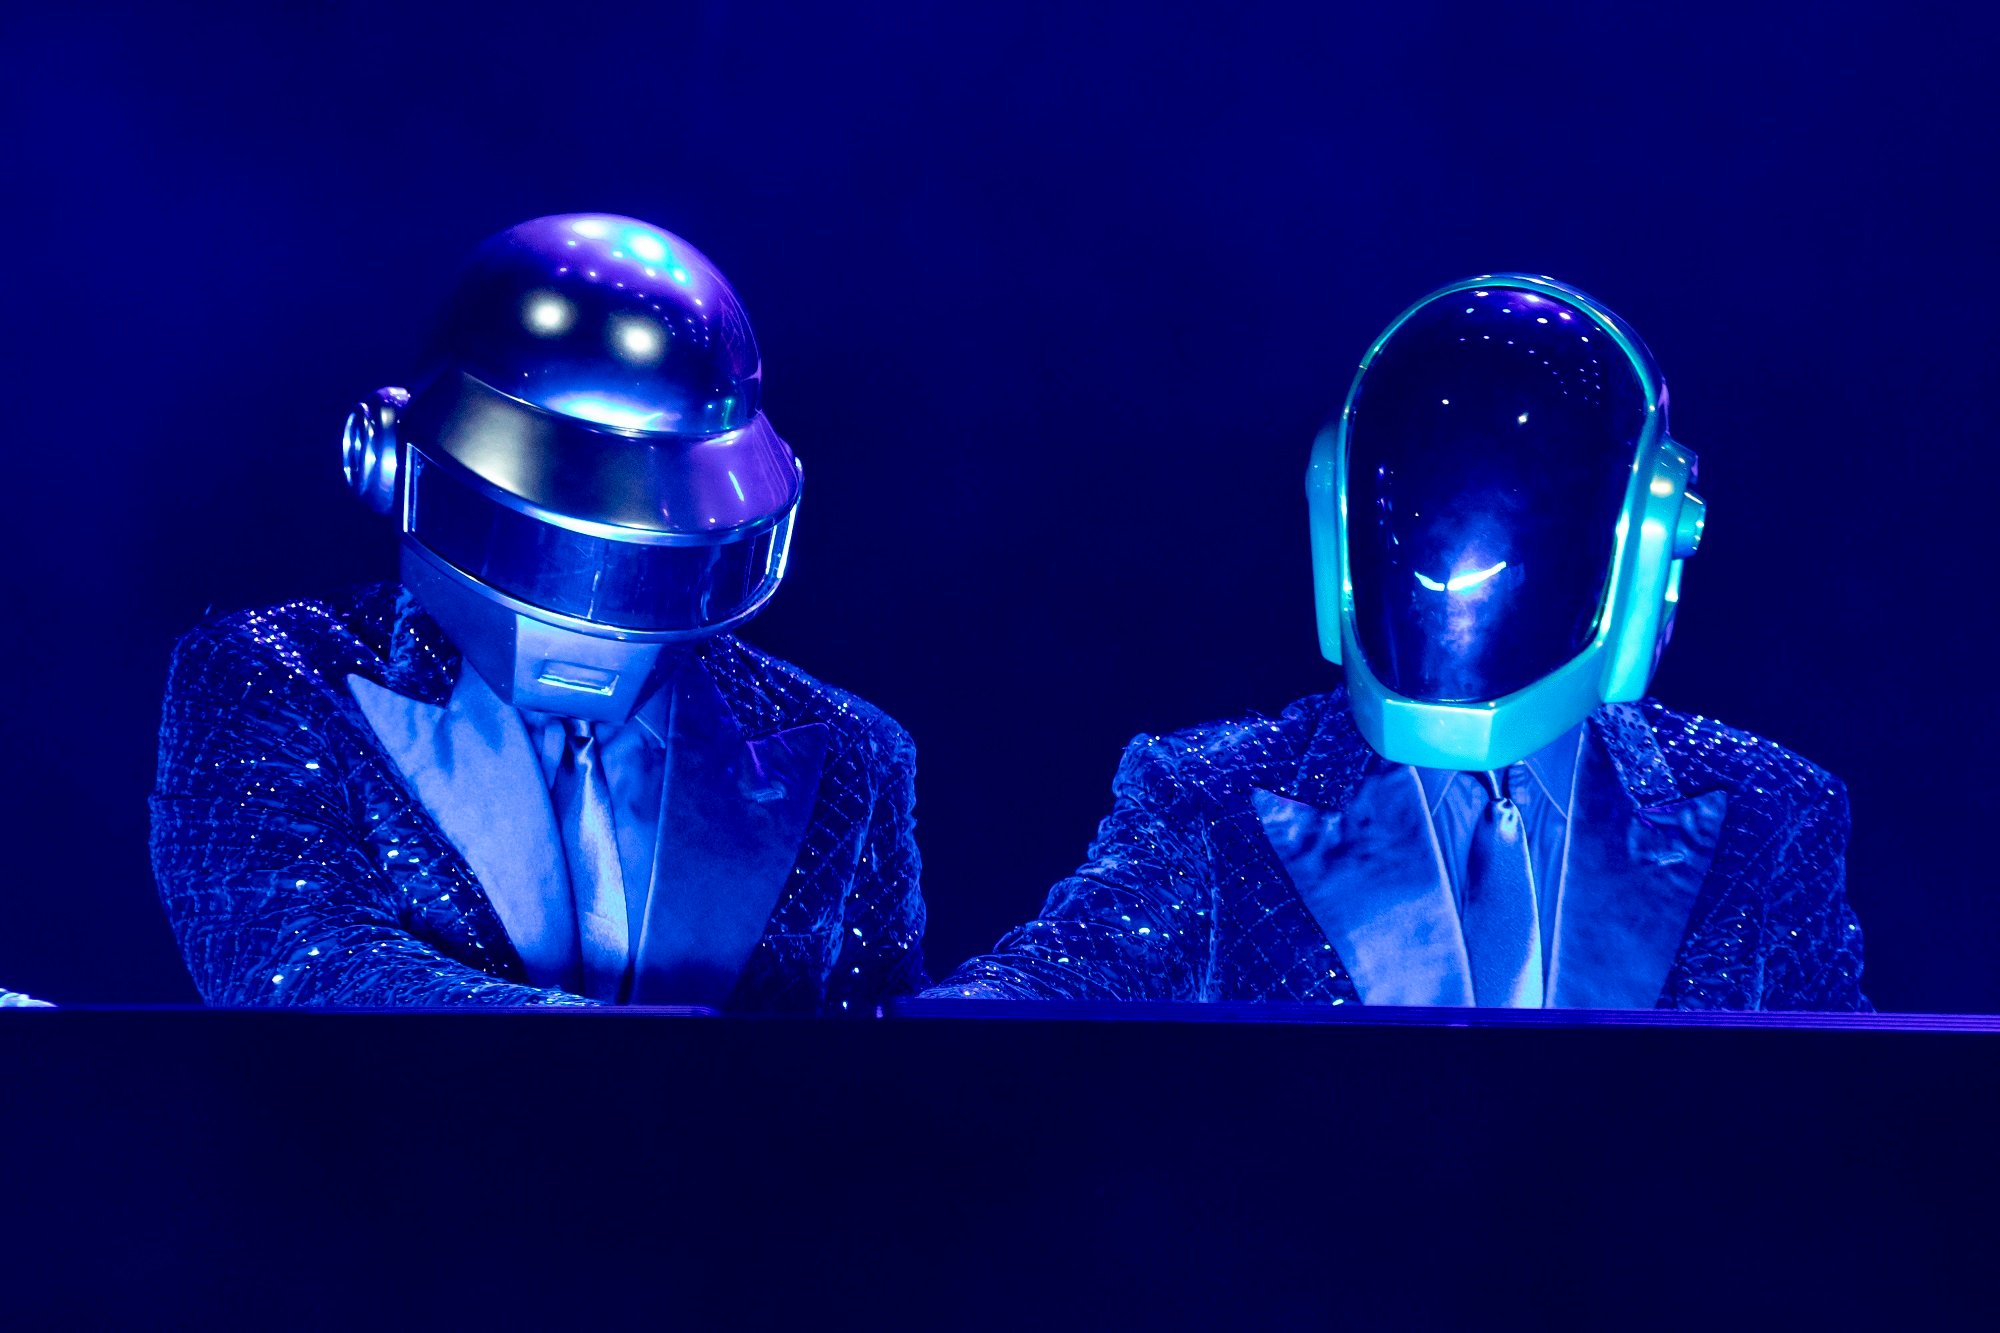 Daft Punk's helmets are an iconic part of their performances